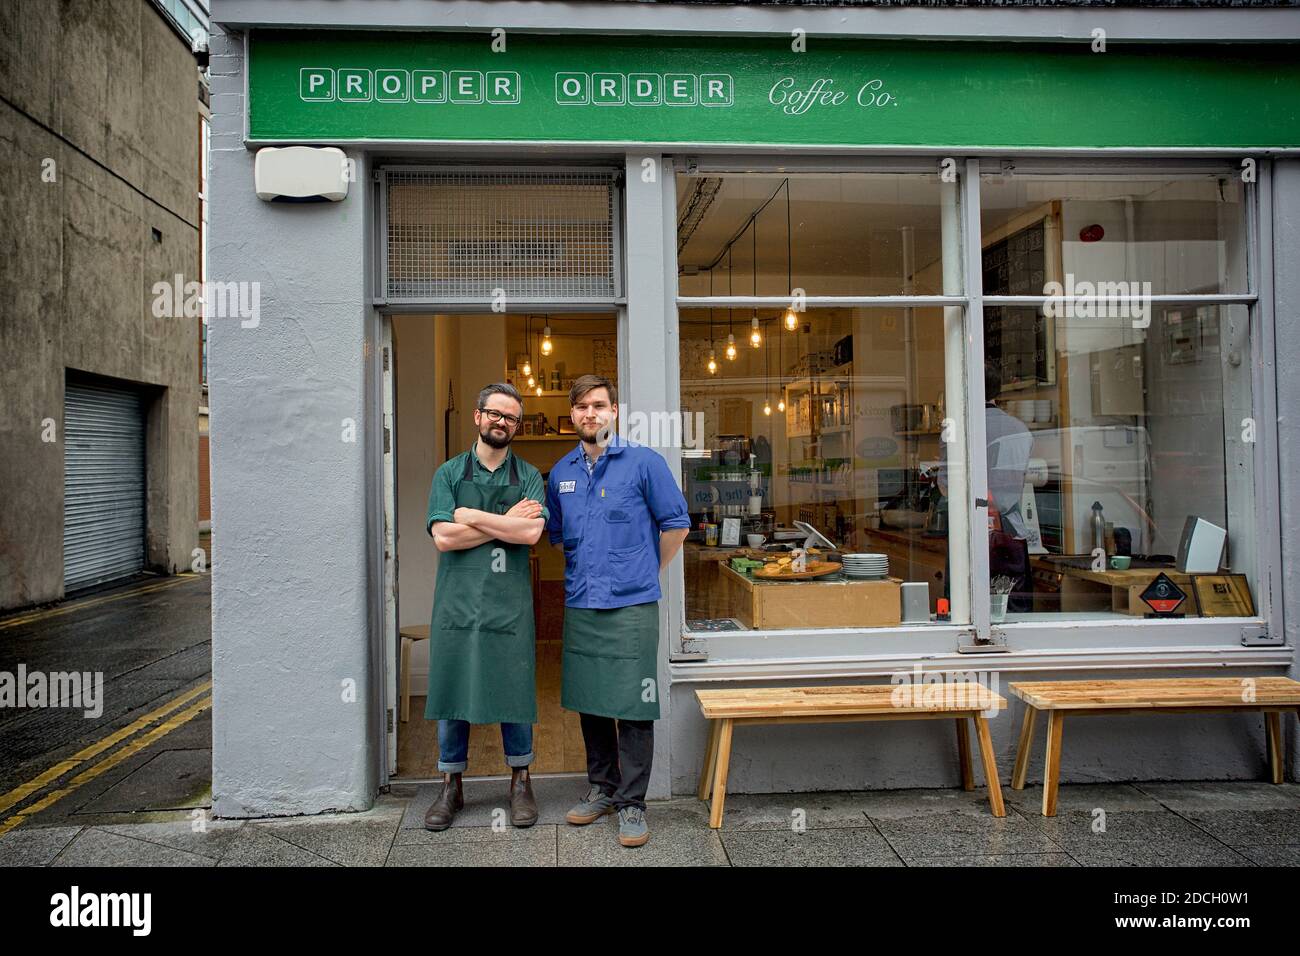 Ireland/Dublin /Coffee Style /Young owners of Proper Order Coffee Co. standing arms crossed In front of the cafe Stock Photo